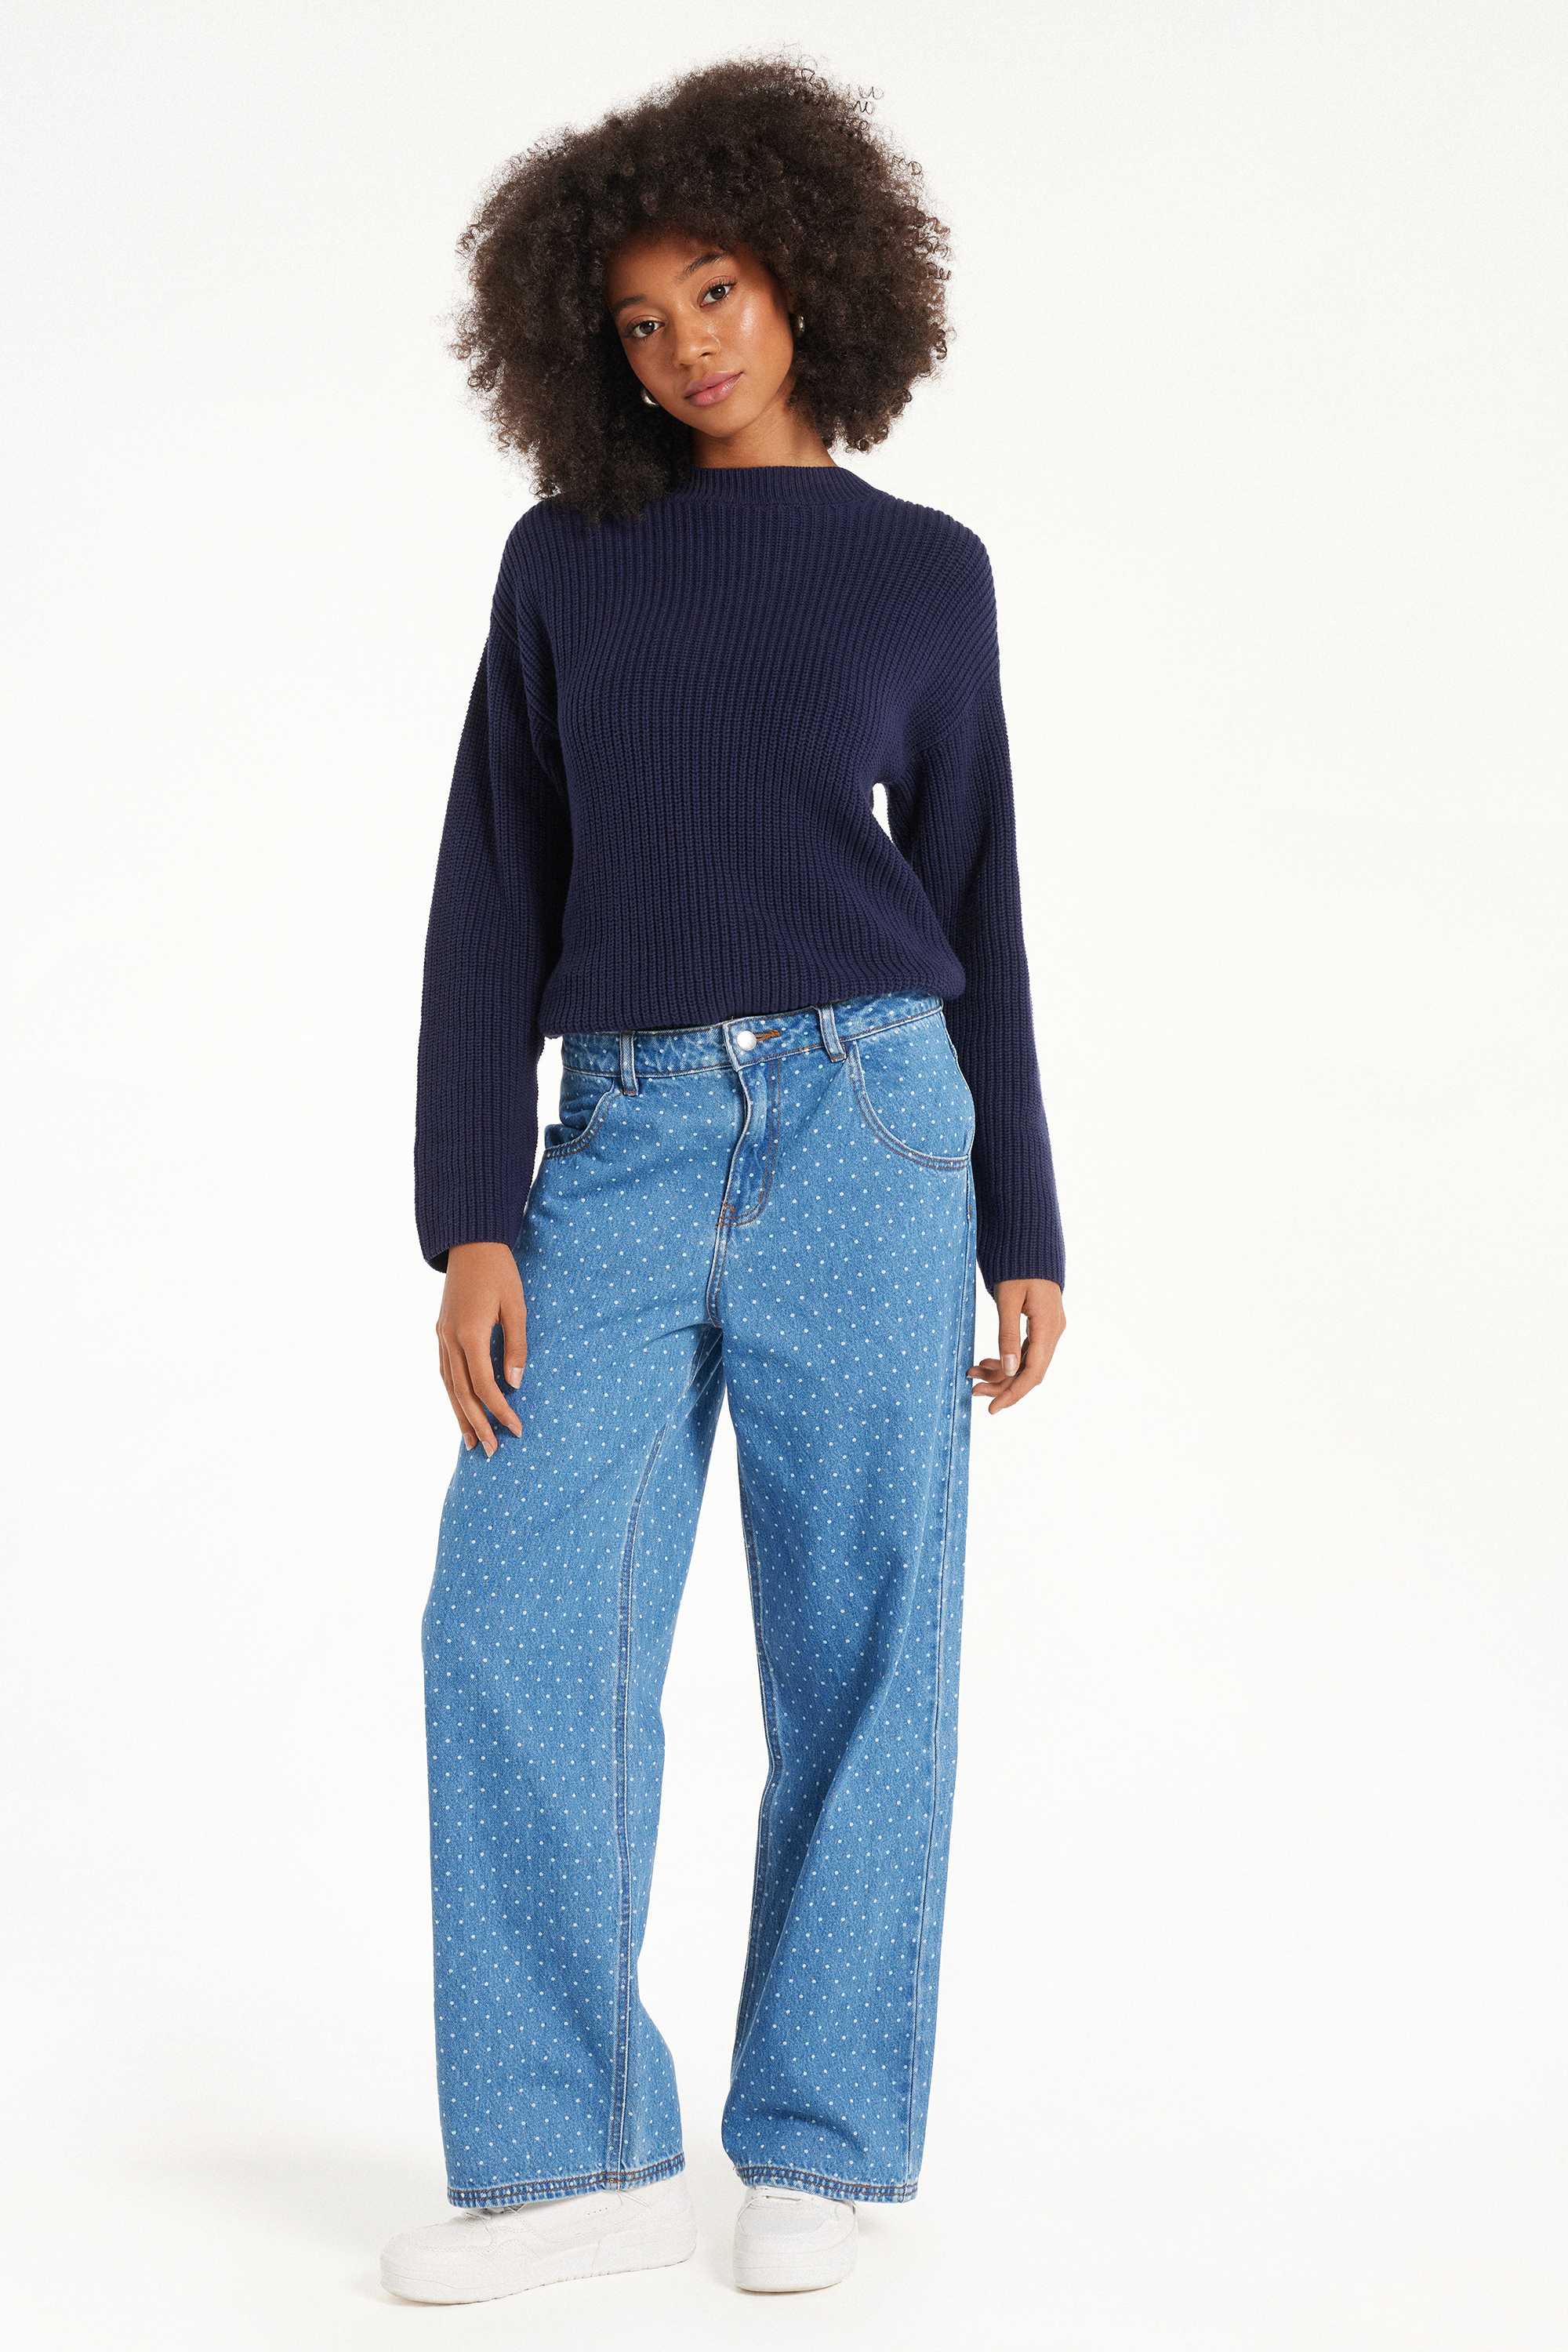 Polka-Dotted Palazzo Jeans